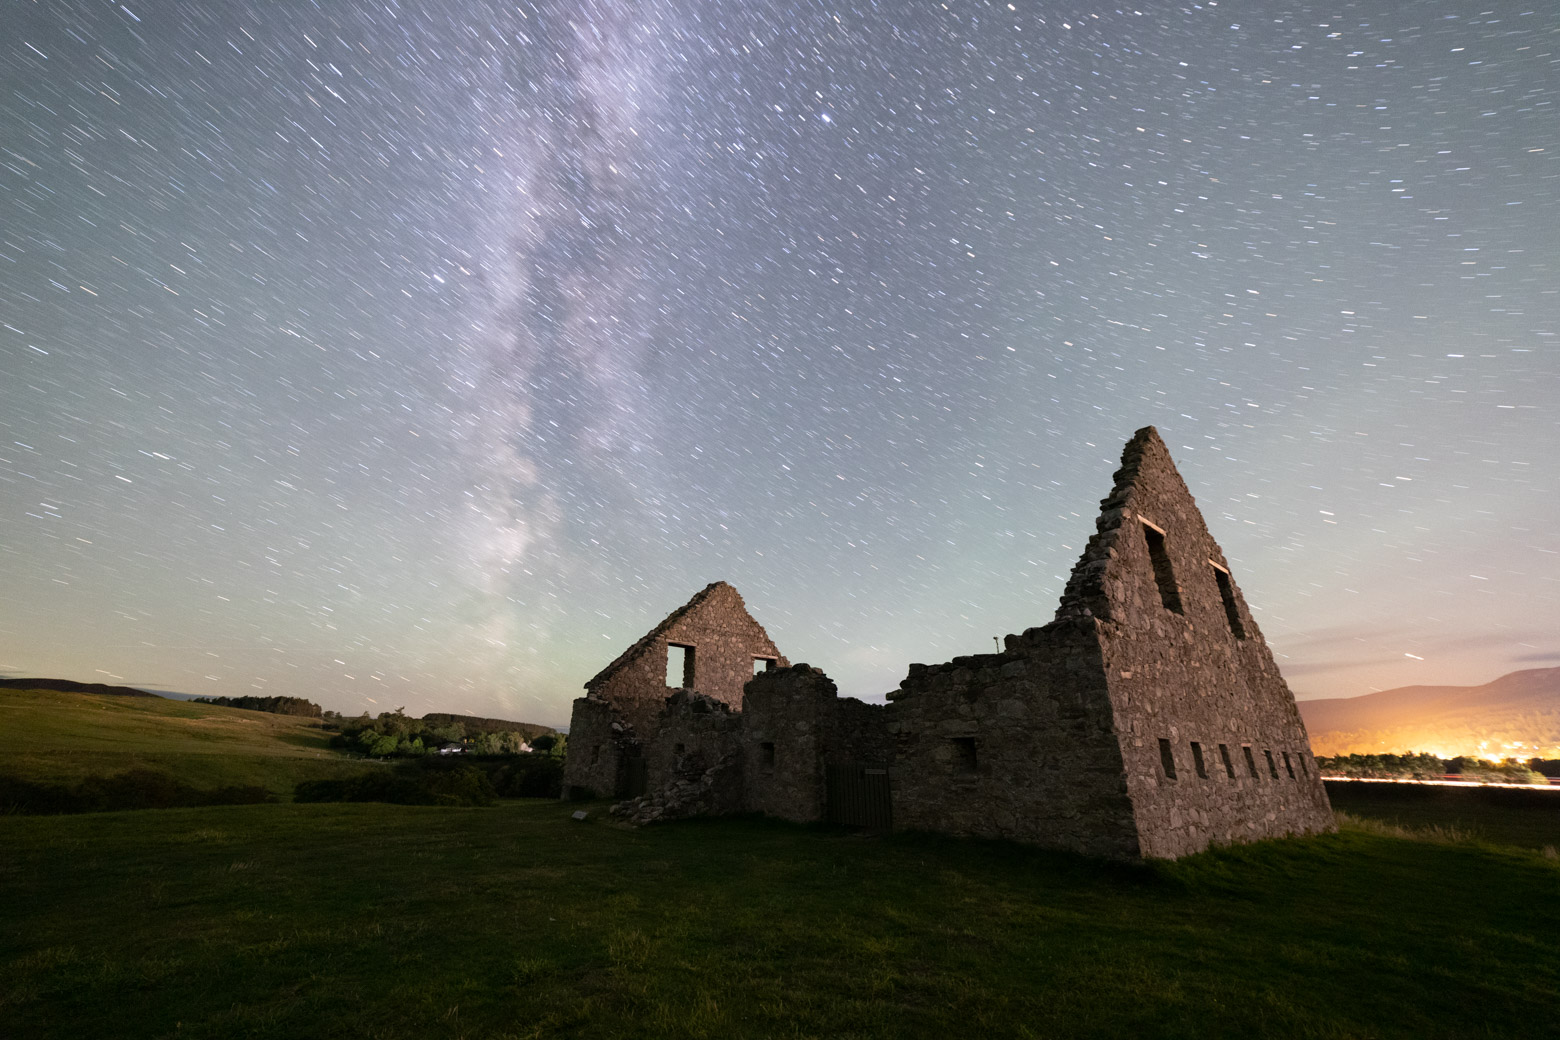 A very short star trail at Ruthven barracks in August 2022 - the Milky Way is still prominent but the movement of the Earth is evident.